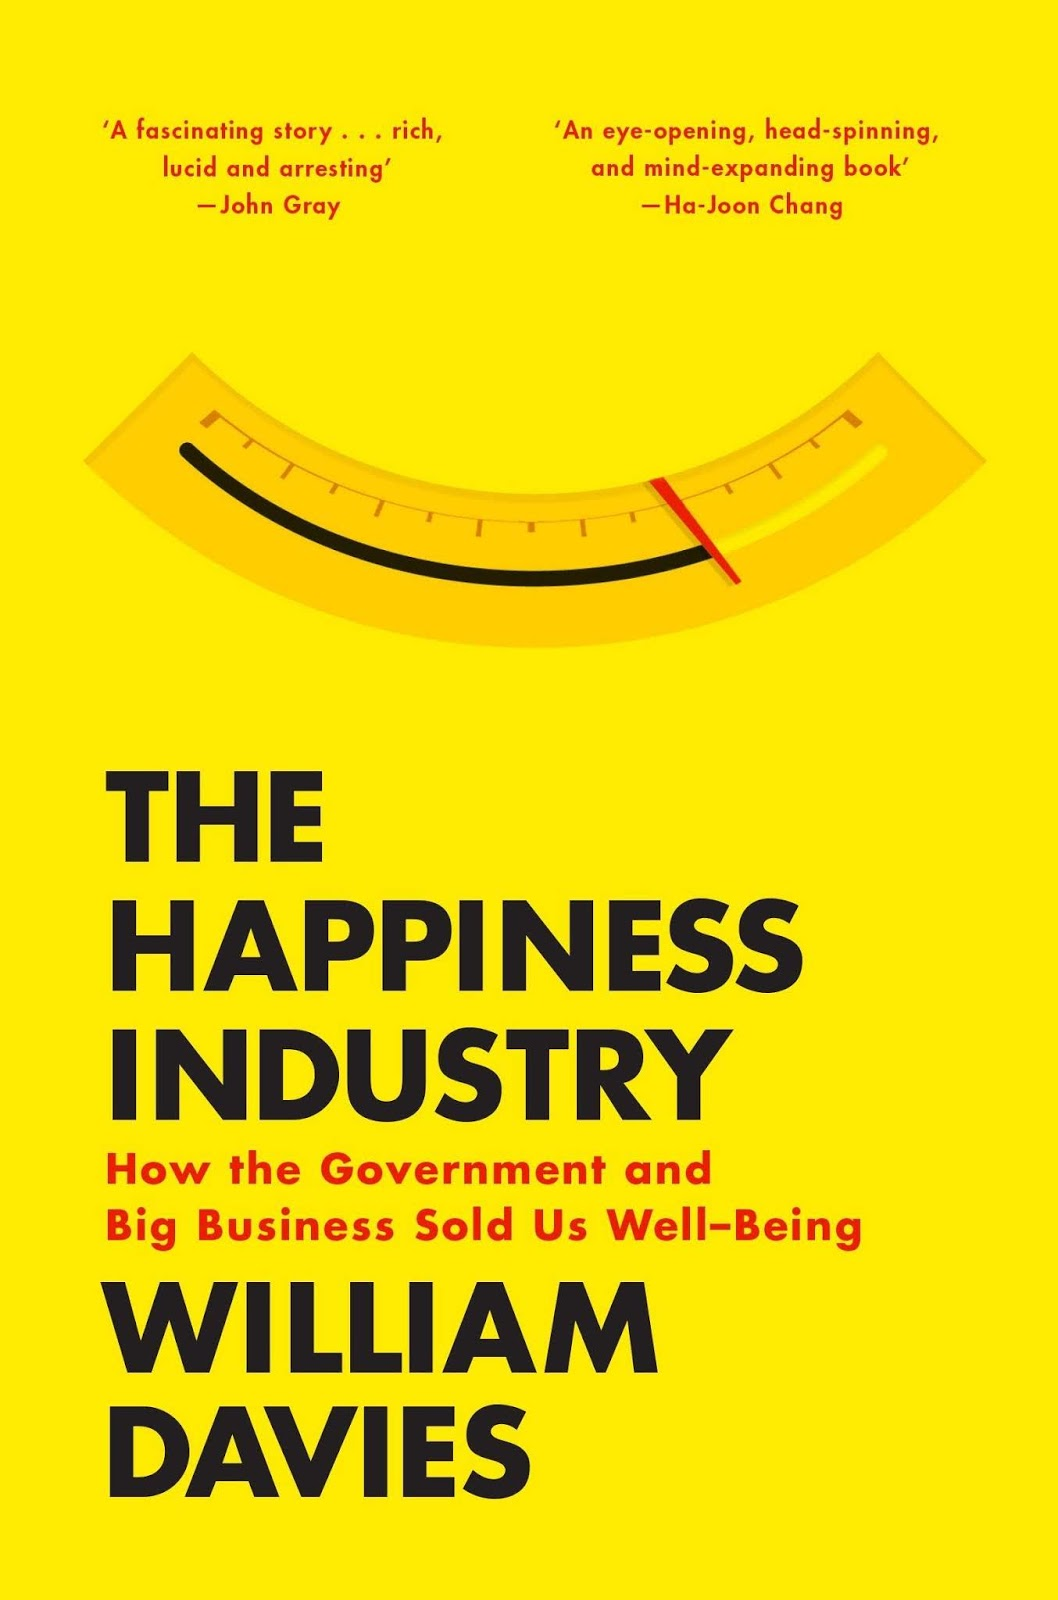 Livro 'The Happiness Industry'